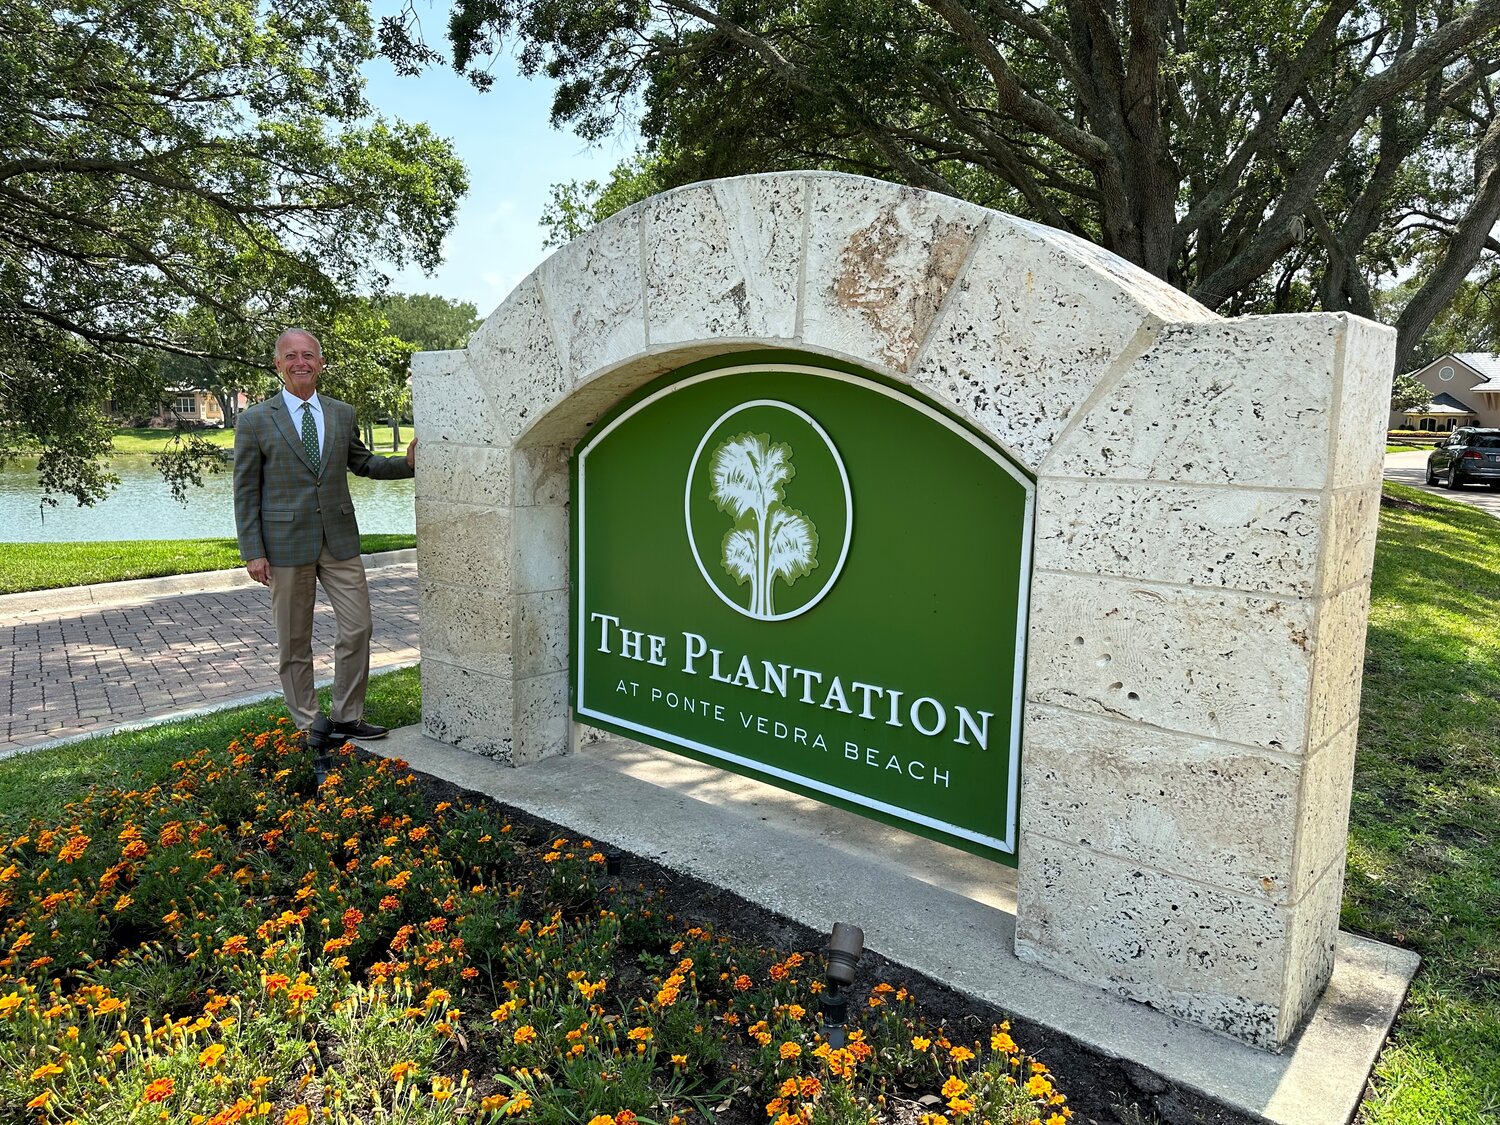 Walther Vliegen is the current general manager and COO at The Plantation at Ponte Vedra Beach. It is his third stint at the club.